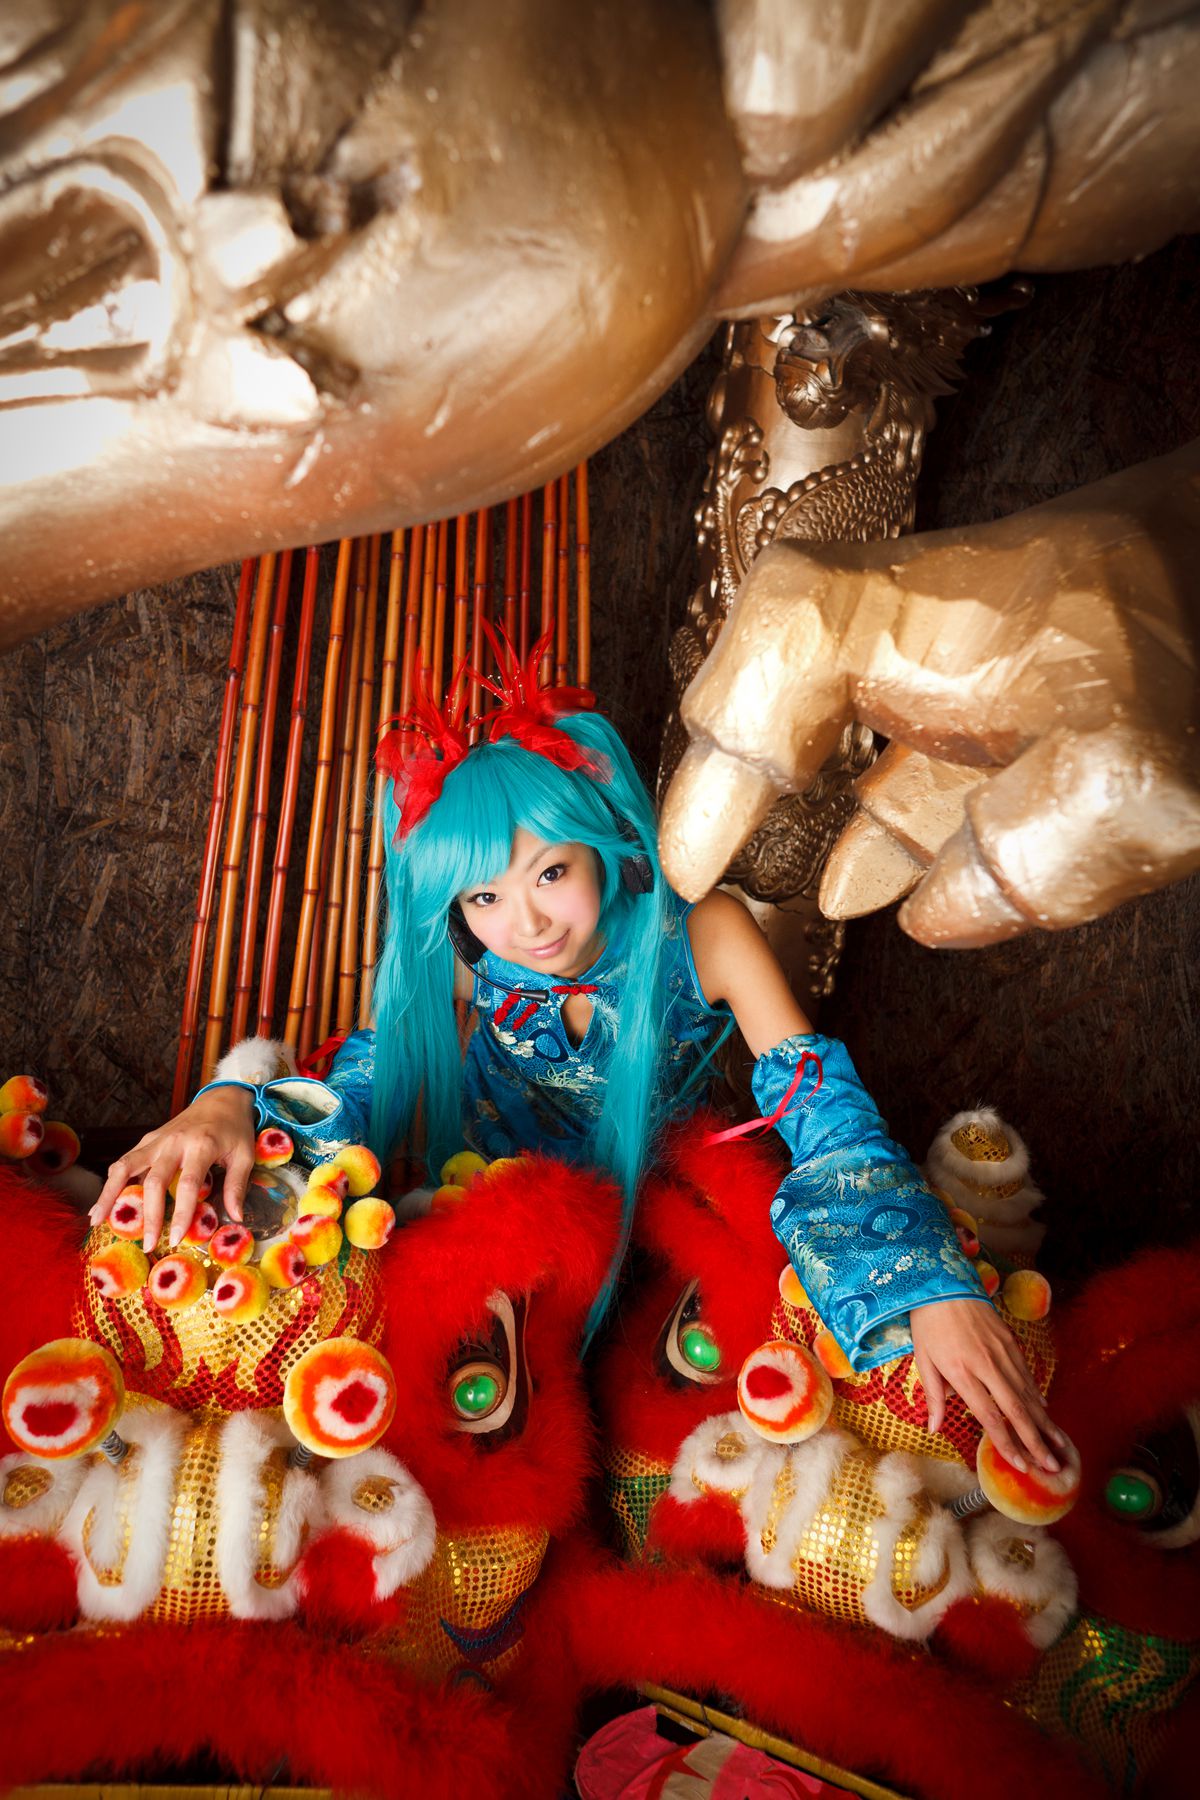 taotuhome[Cosplay] Necoco as Hatsune Miku from Vocaloid 套图第32张